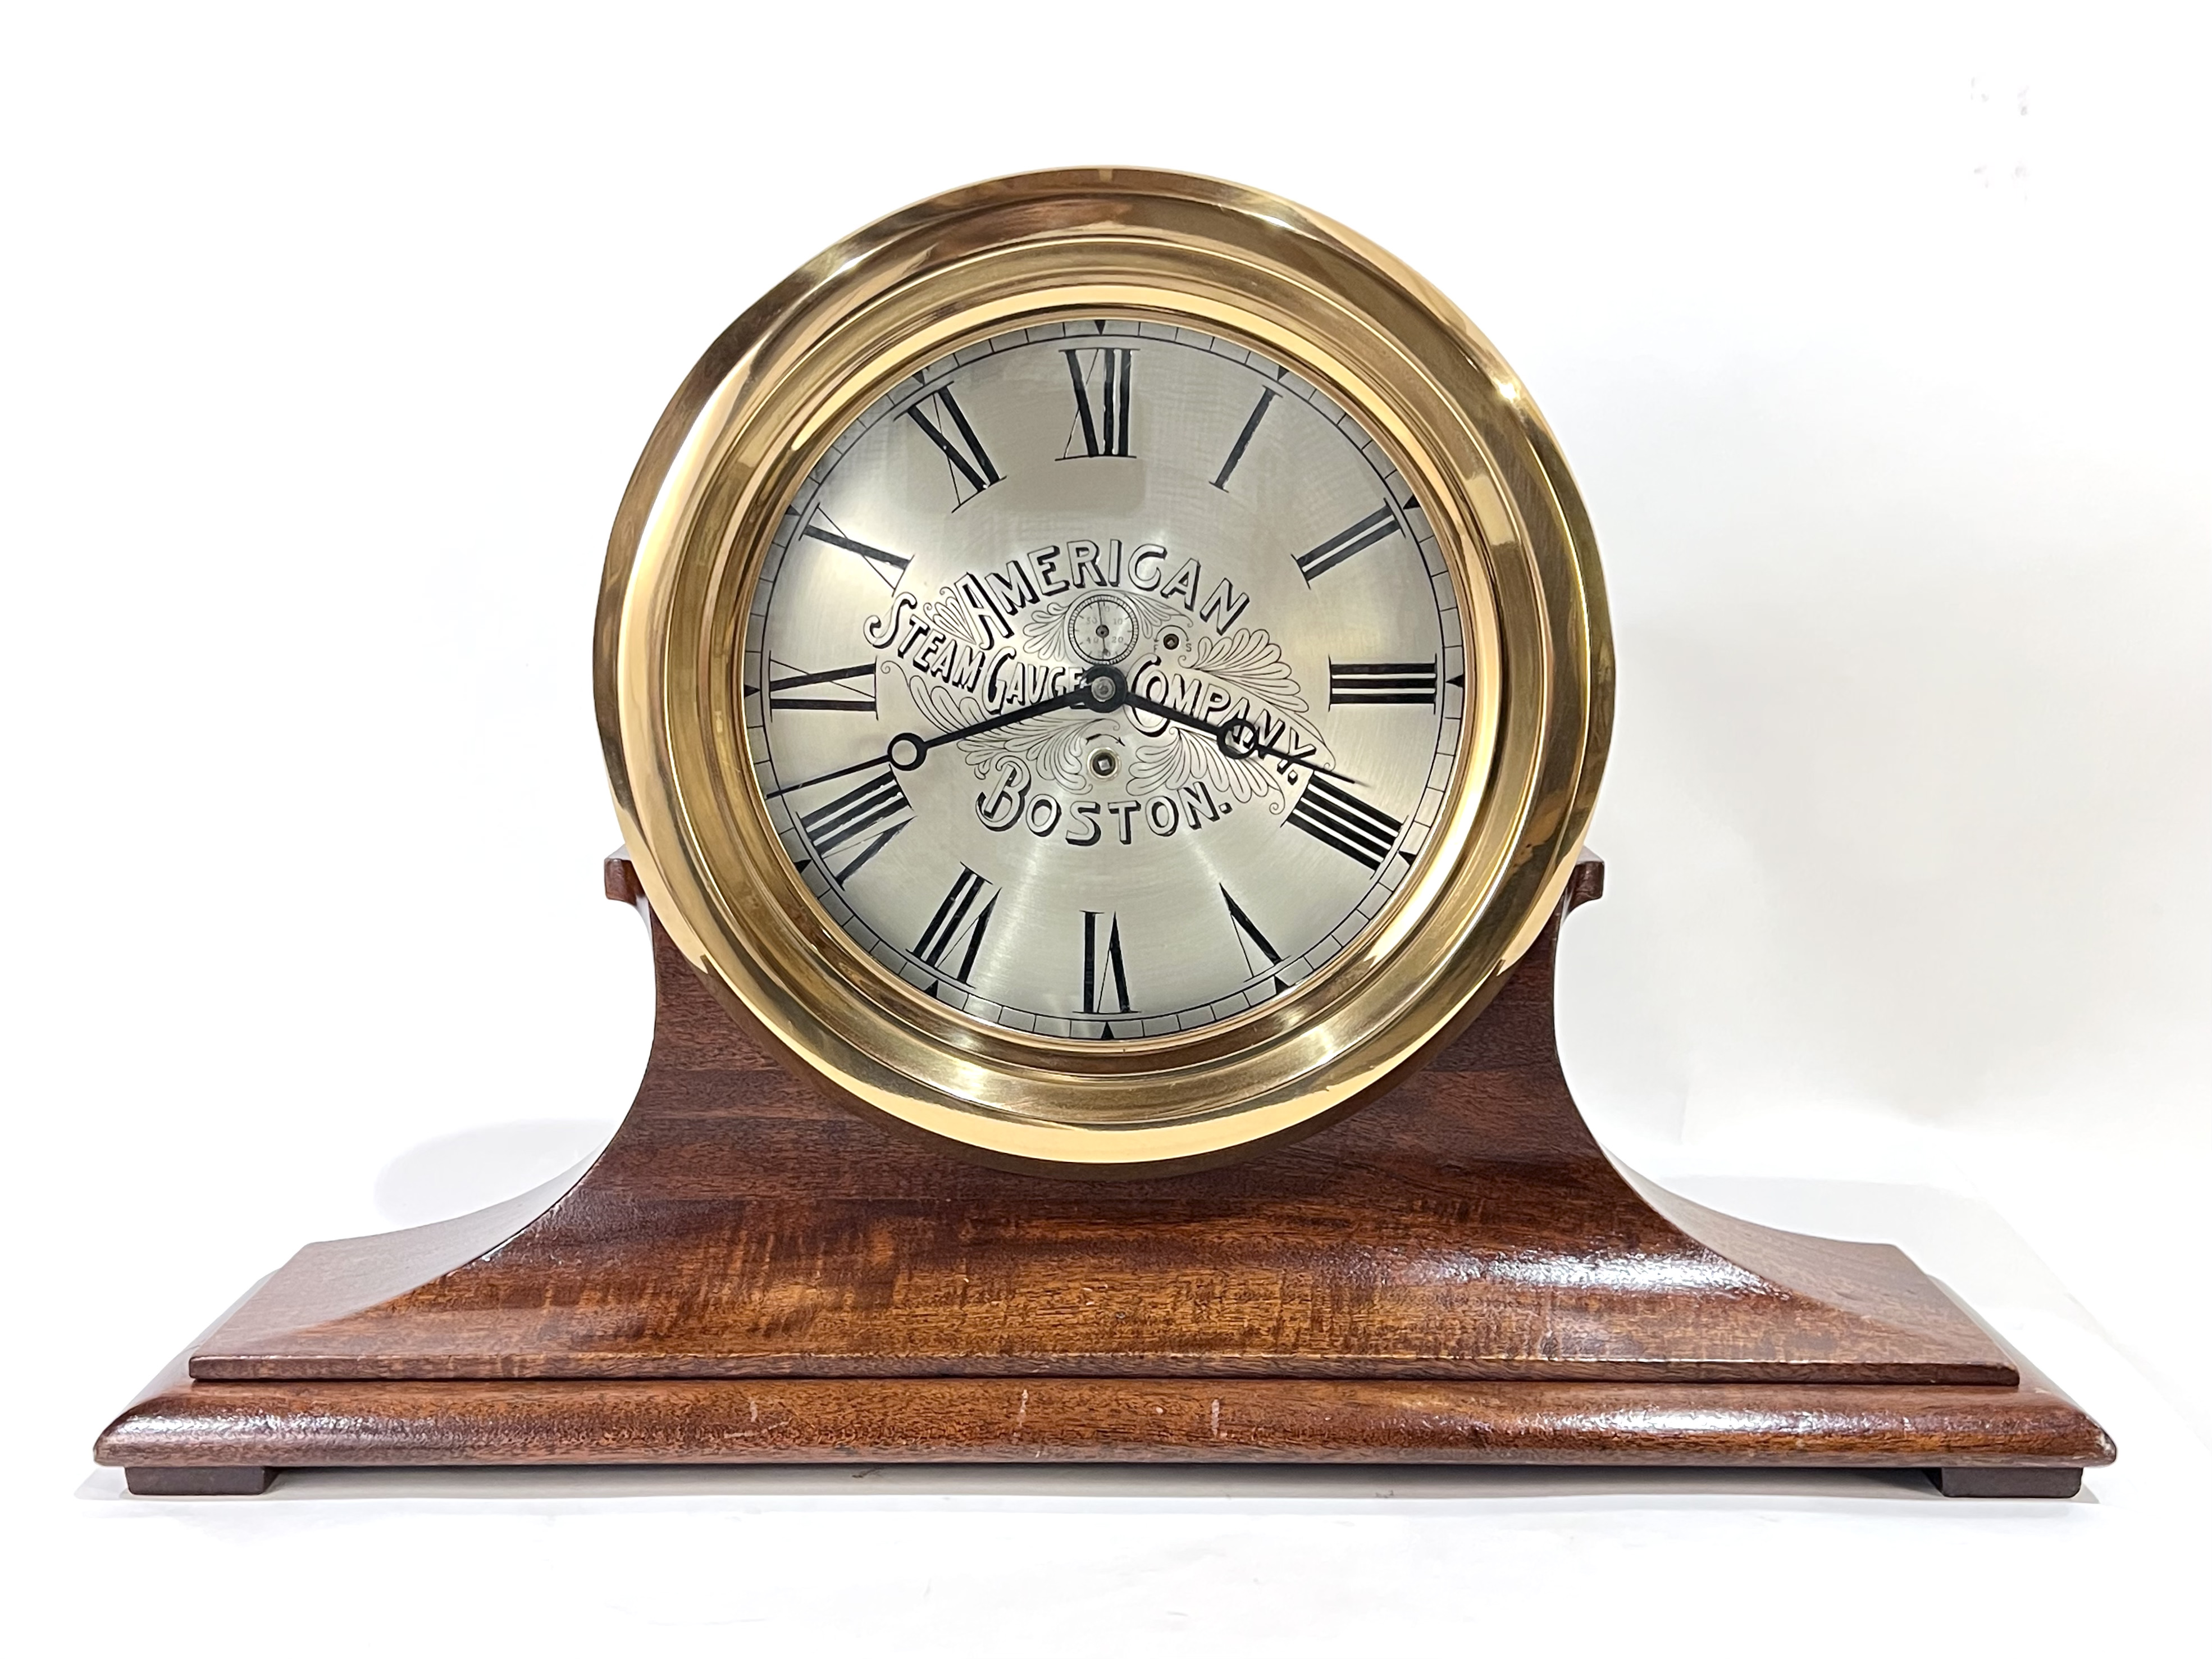 Chelsea Clock Co. 10 inch Marine Clock for American Steam Gauge Co. - Superb Dial!